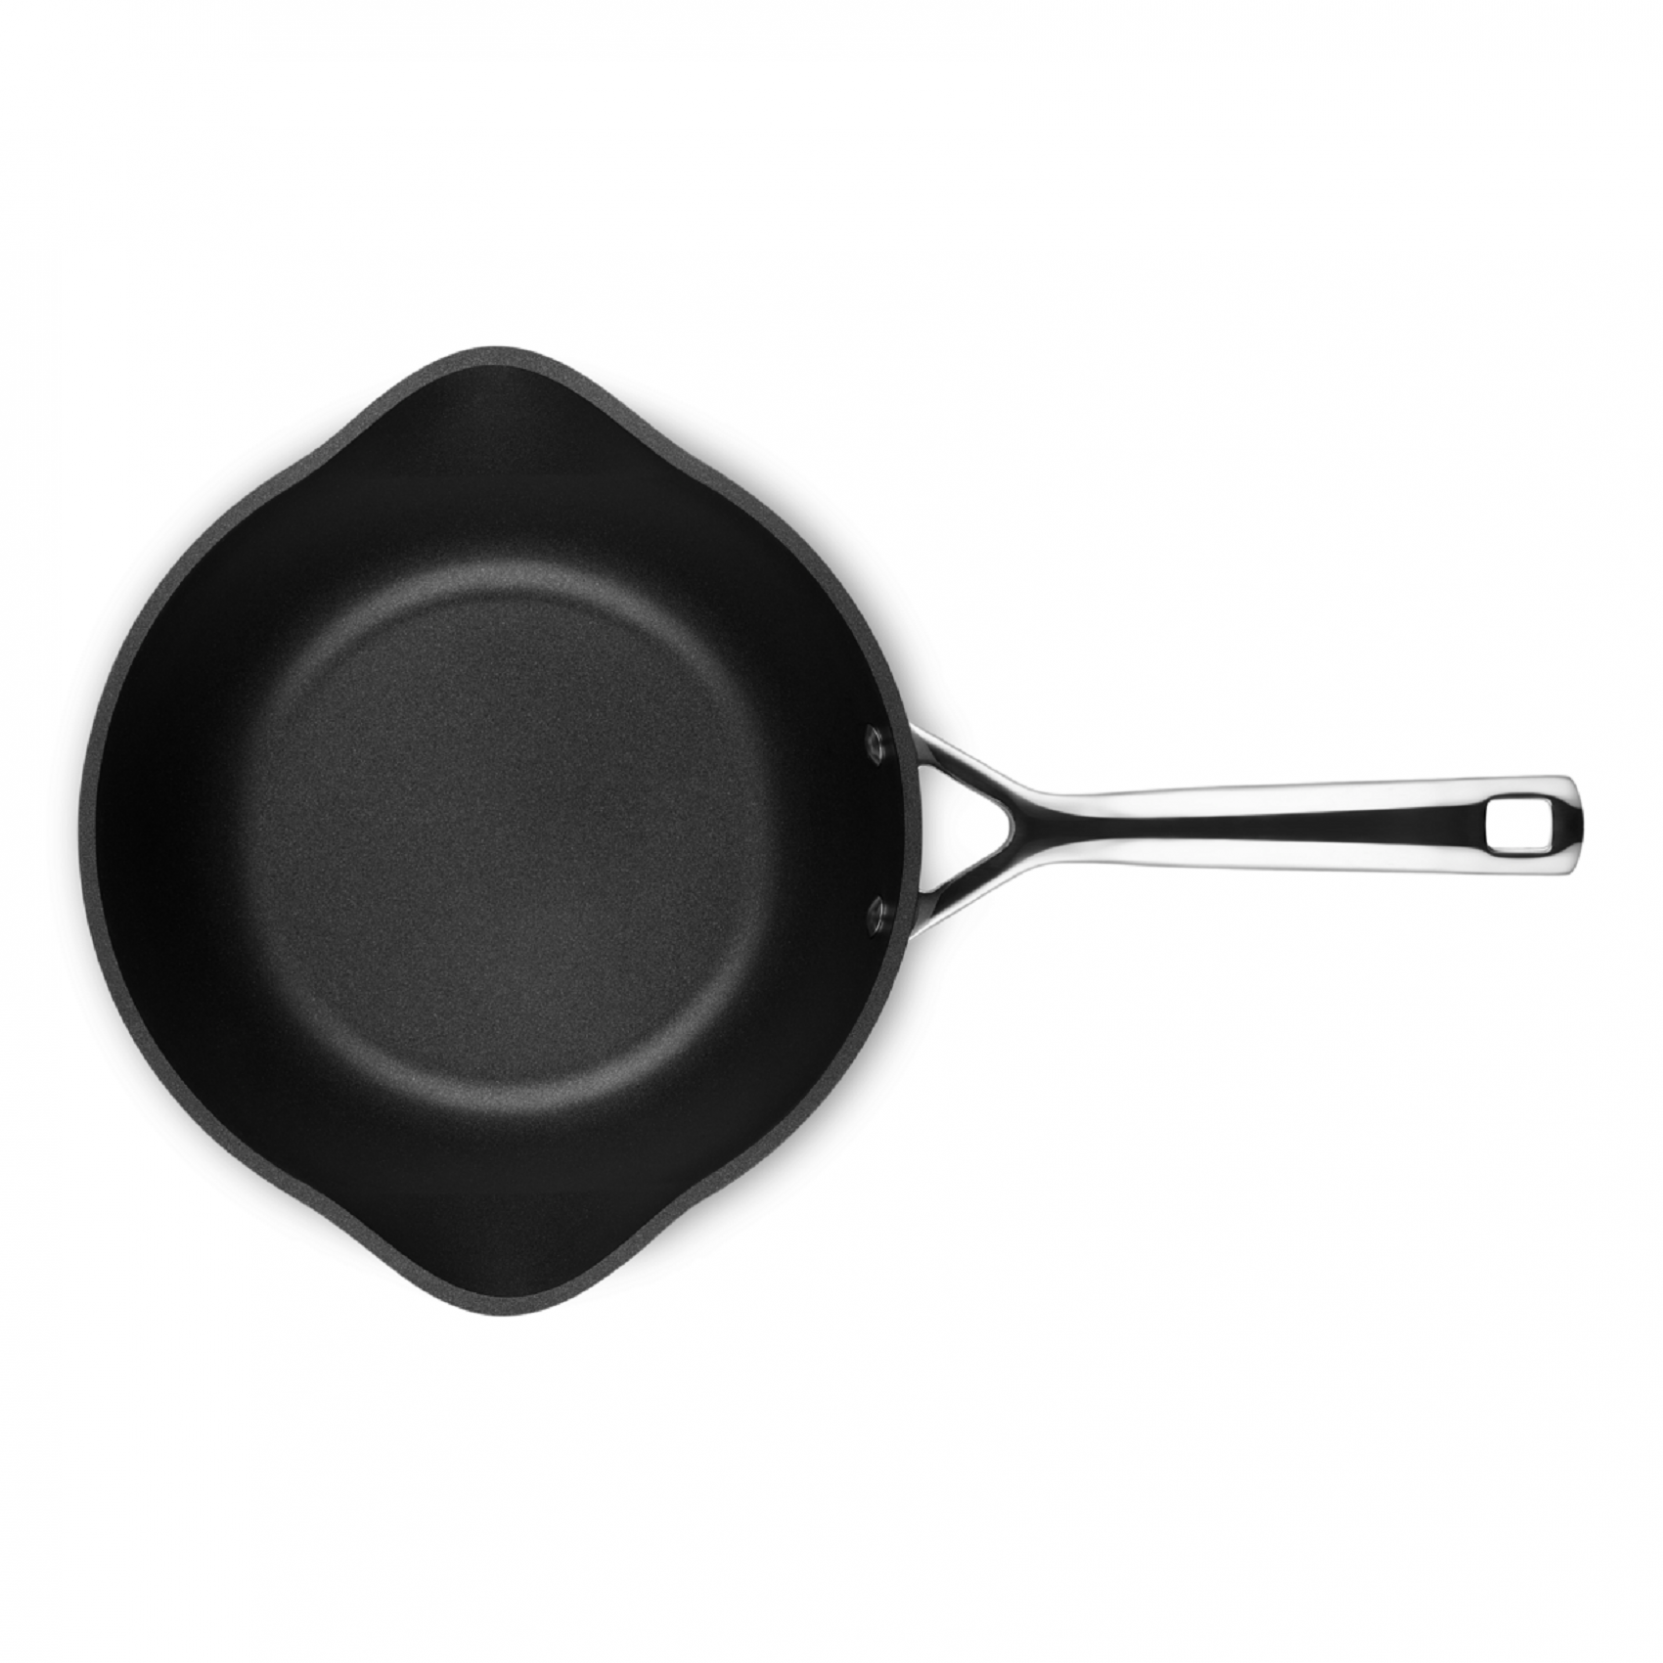 https://www.tattahome.com/101692-thickbox_default/le-creuset-non-stick-chef-s-pan-with-pouring-spouts.jpg